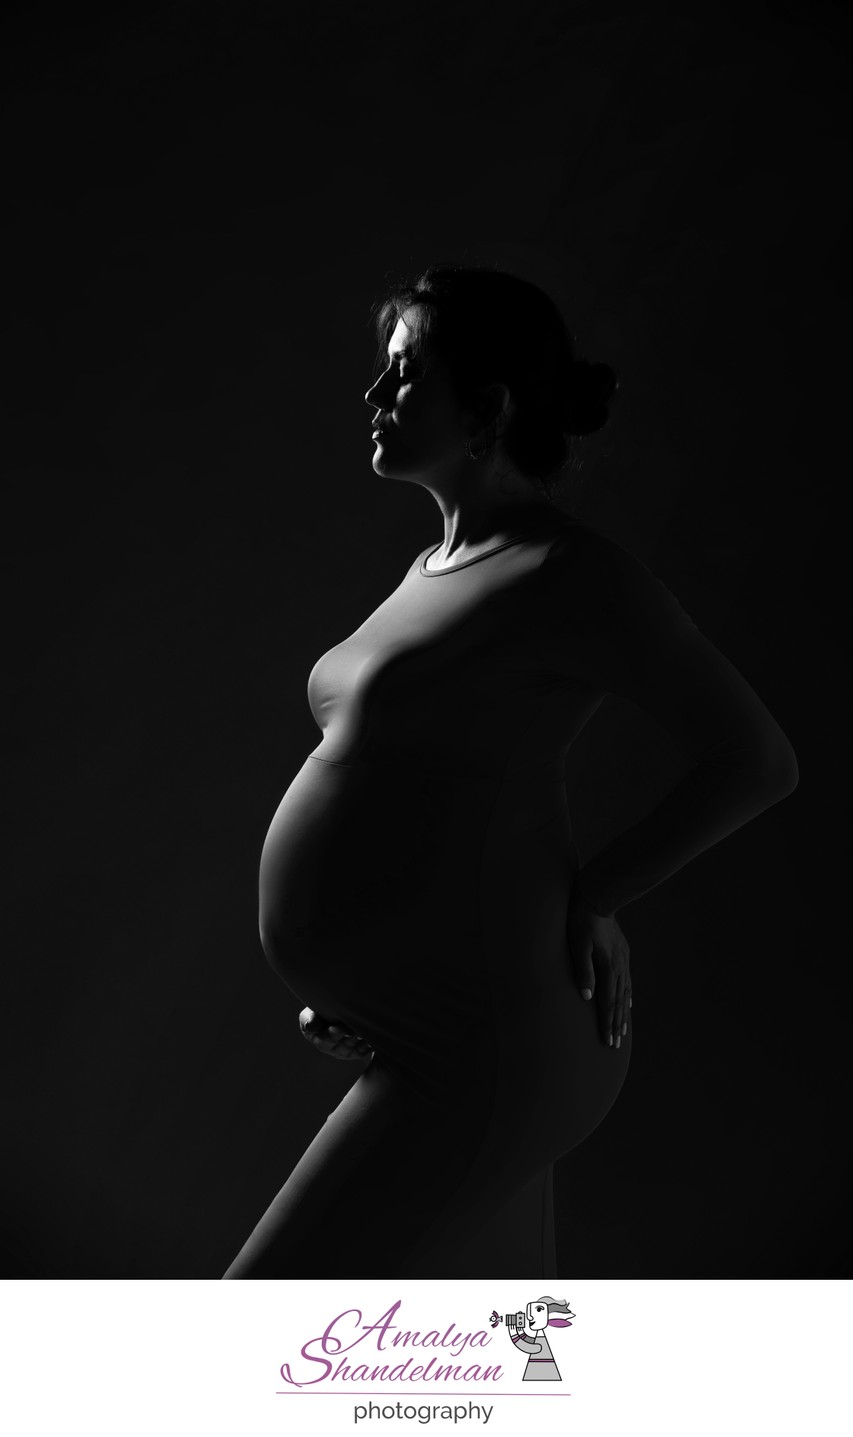 Silhouette Maternity Portrait of Woman Expecting Baby